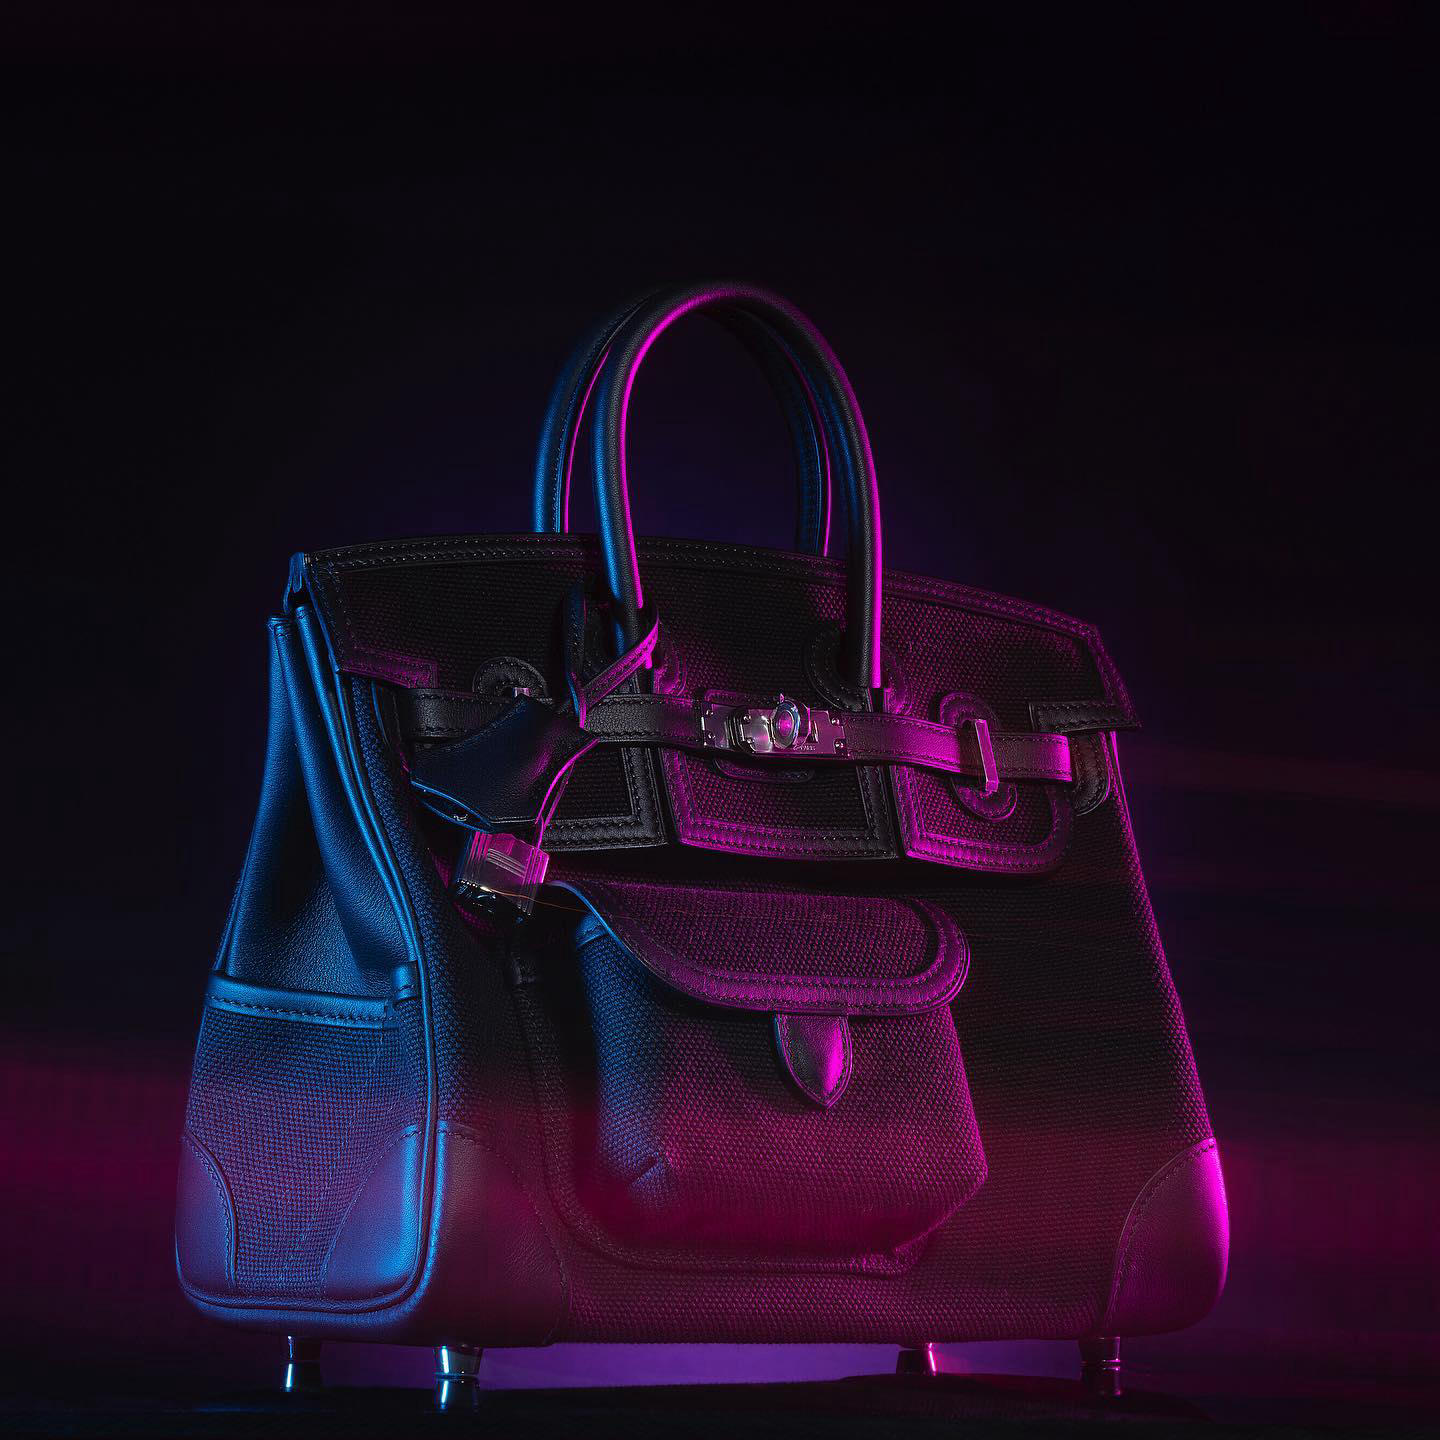 image  1 Christie's Handbags - Over the years, Hermès has introduced an array of limited-edition styles, rele